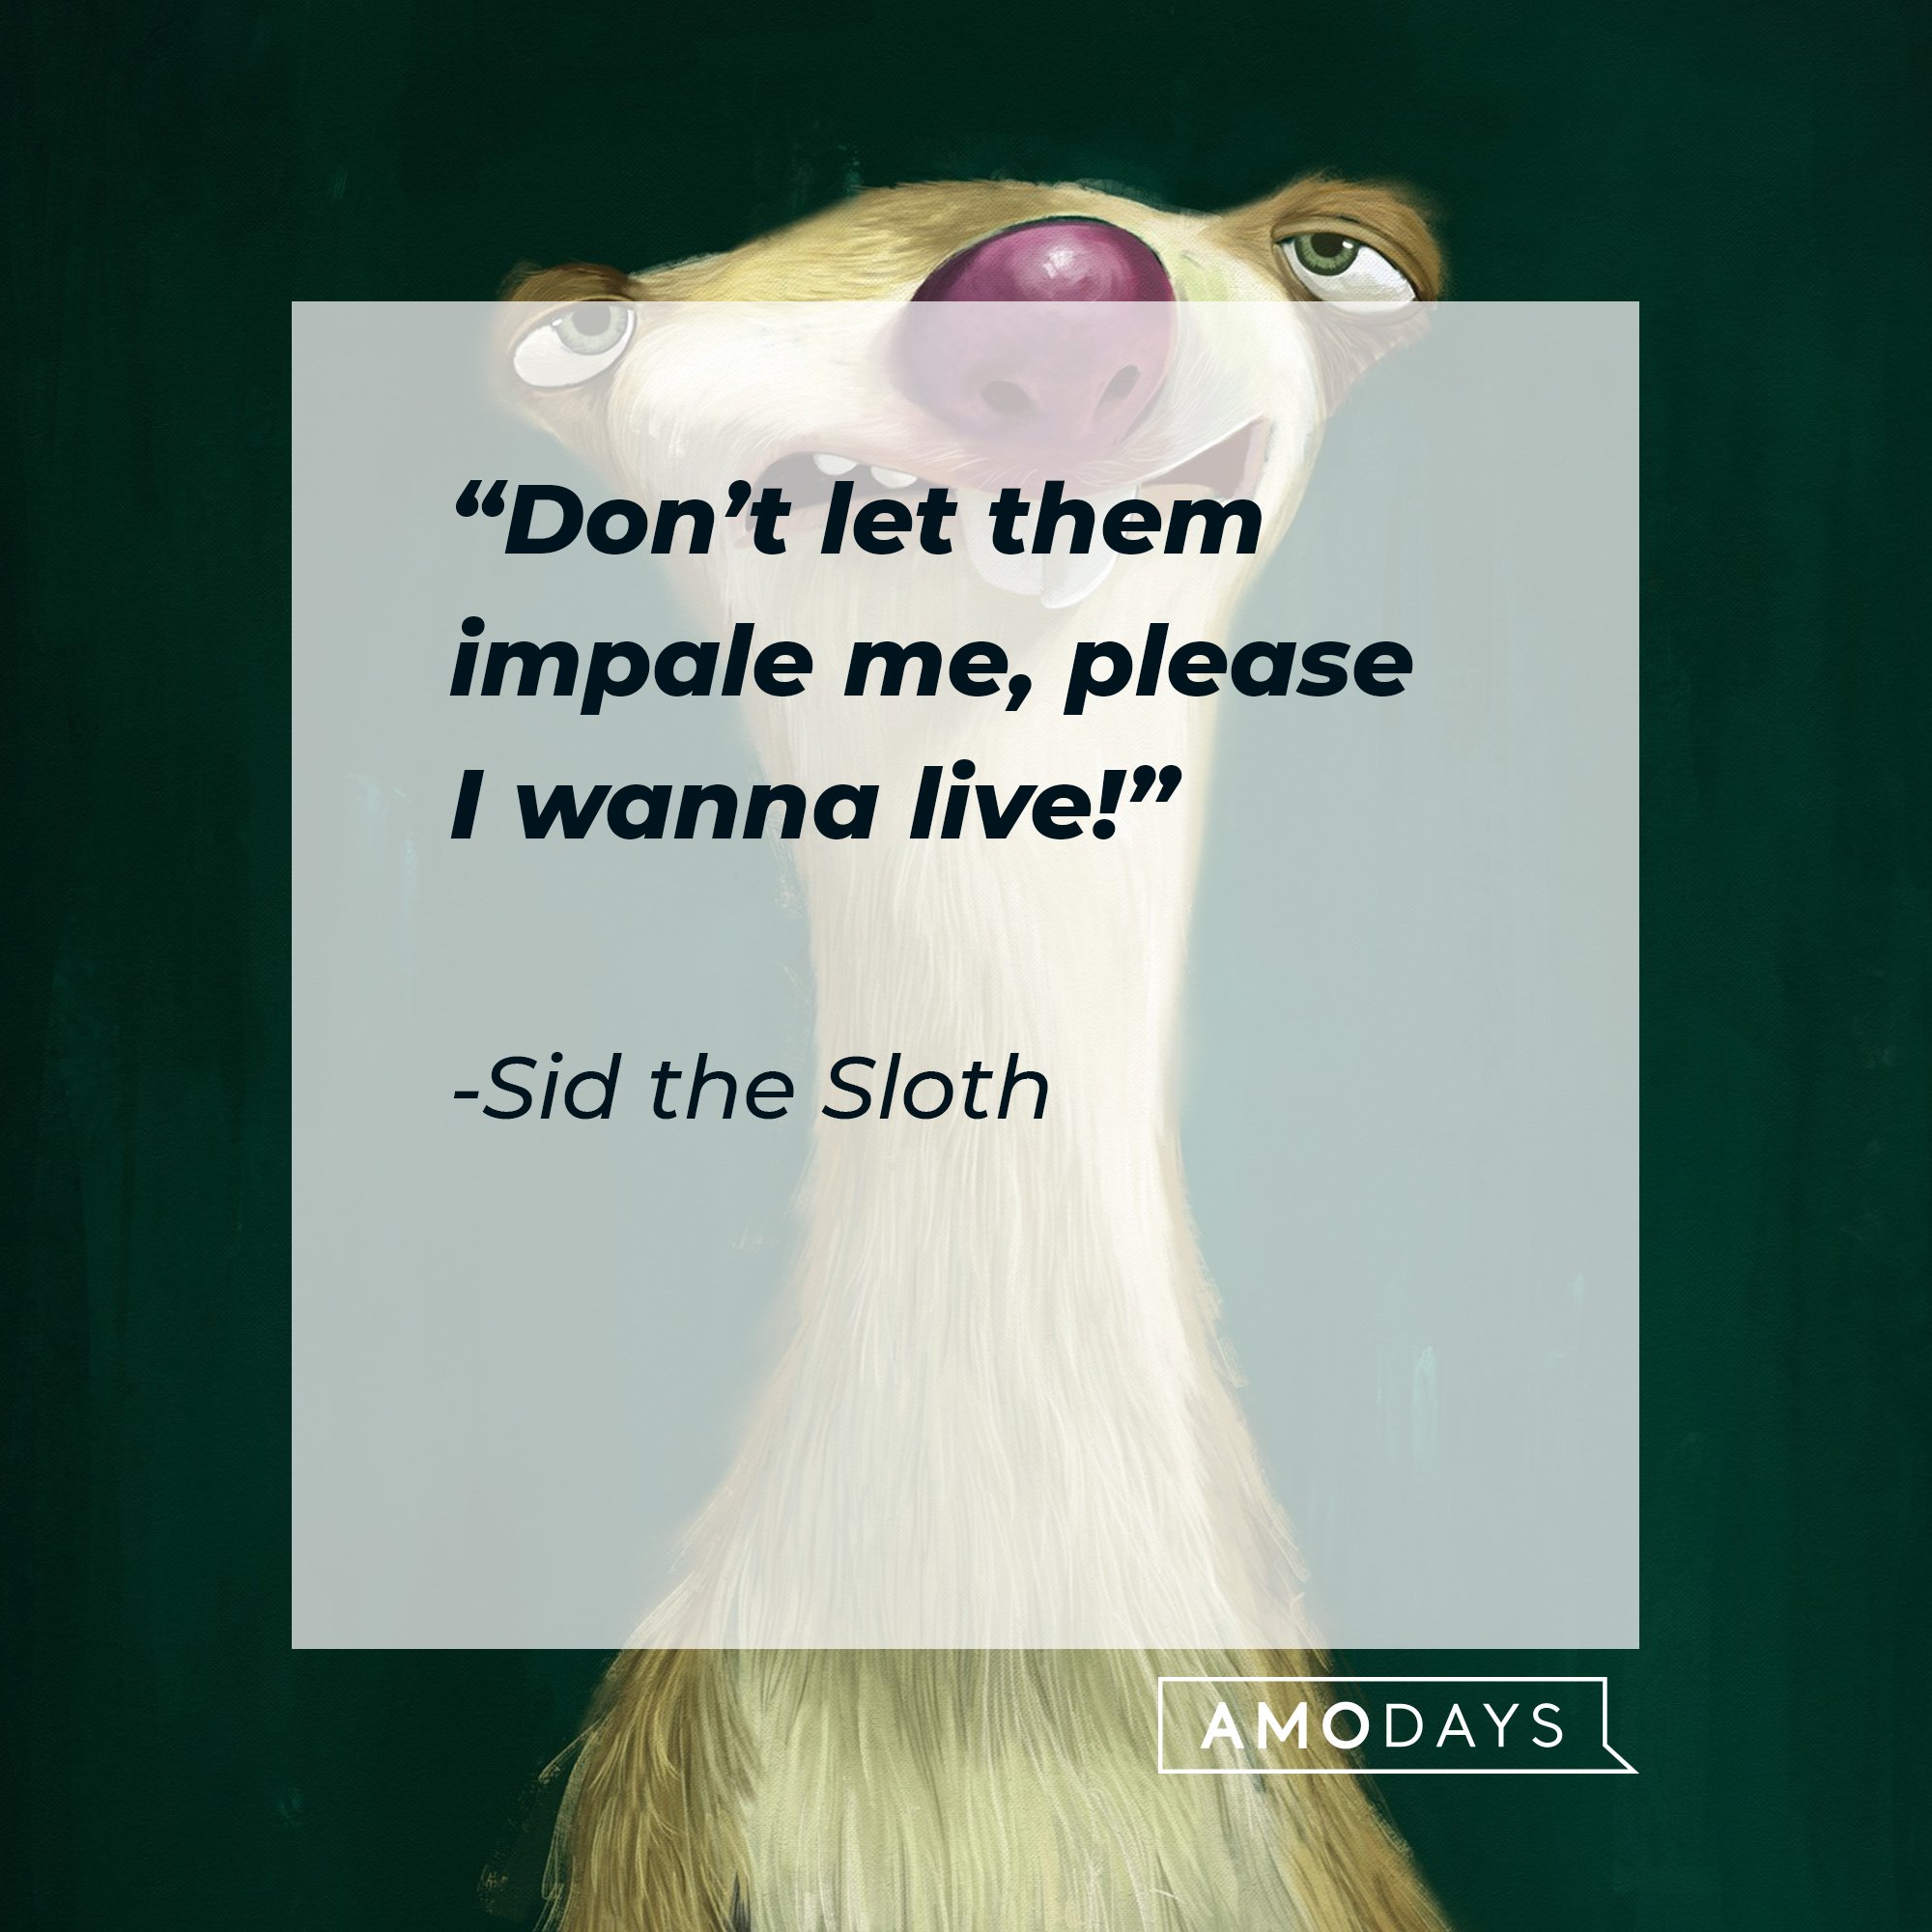  Sid the Sloth's quote: “Don’t let them impale me, please I wanna live!” | Image: AmoDays